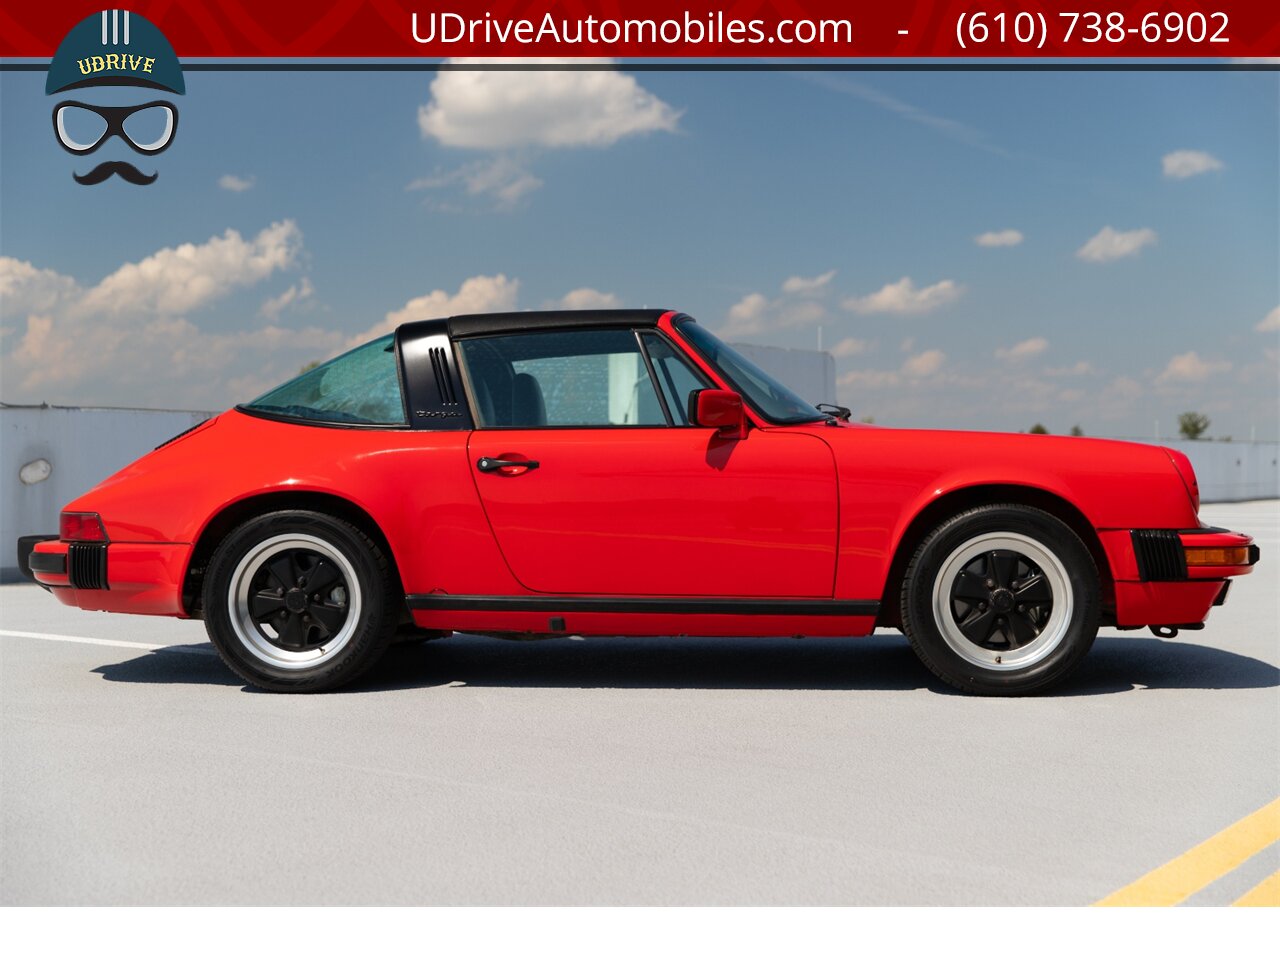 1986 Porsche 911 Carrera Targa 39k Miles Same Owner Since 1988  $23k in Service History Since 2011 - Photo 18 - West Chester, PA 19382